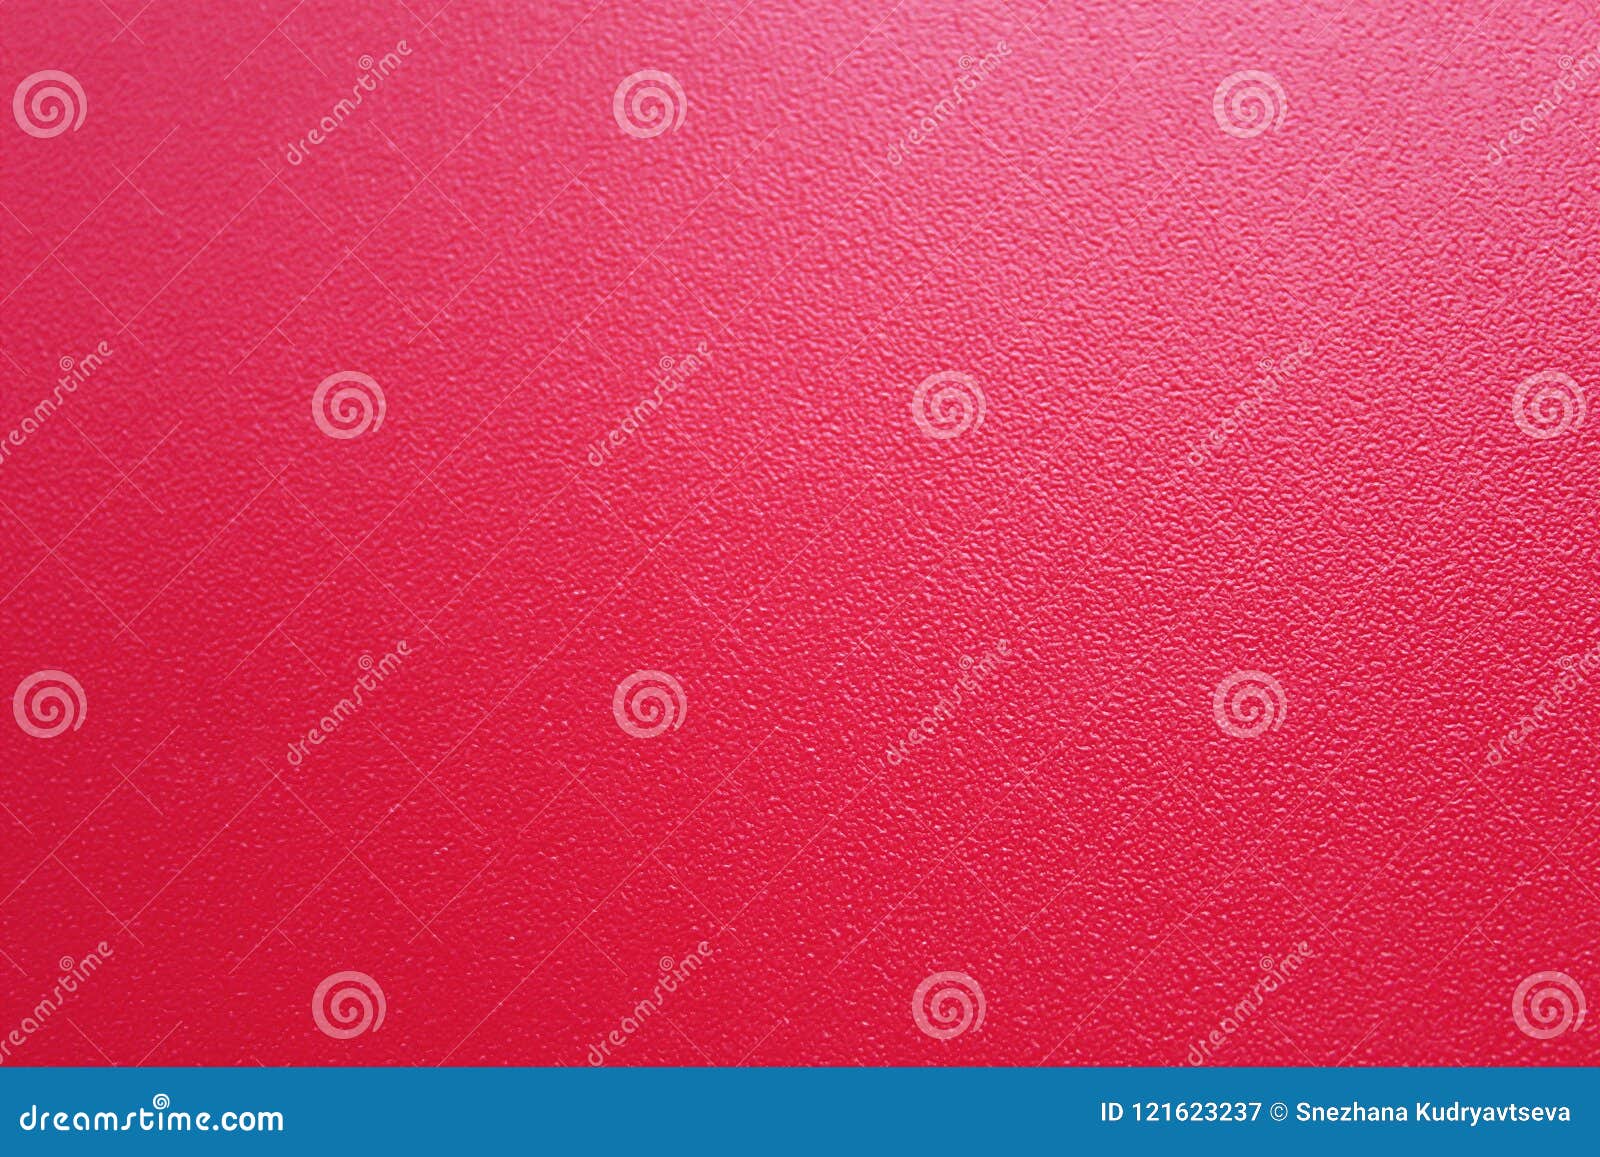 Abstract Pink Background Design Layout Or Old Pink Paper Vintage